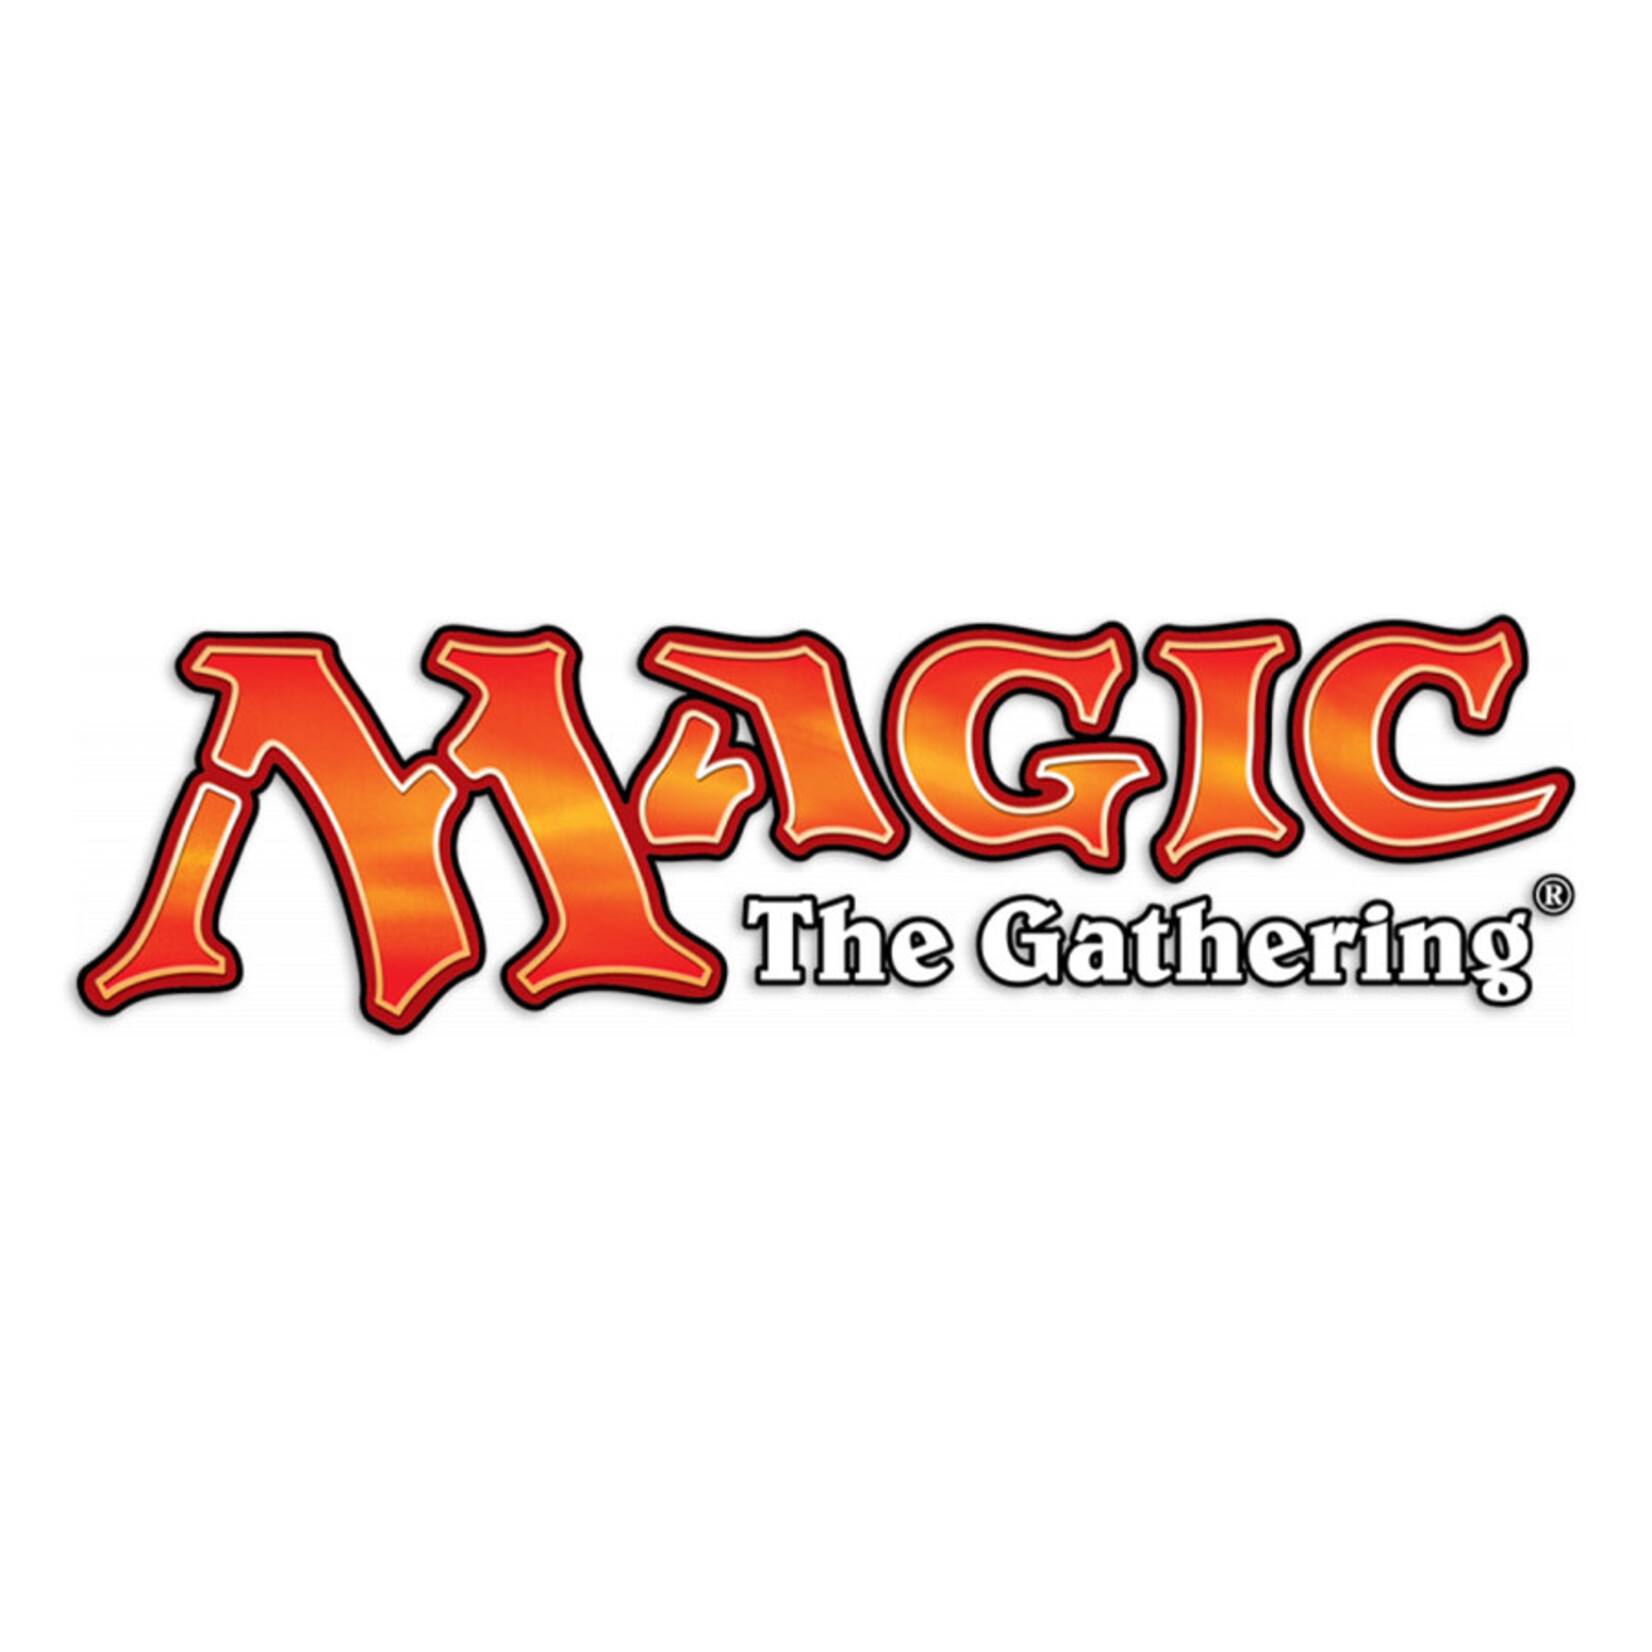 Wizards of the Coast Magic the Gathering: Wilds of Eldraine Commander